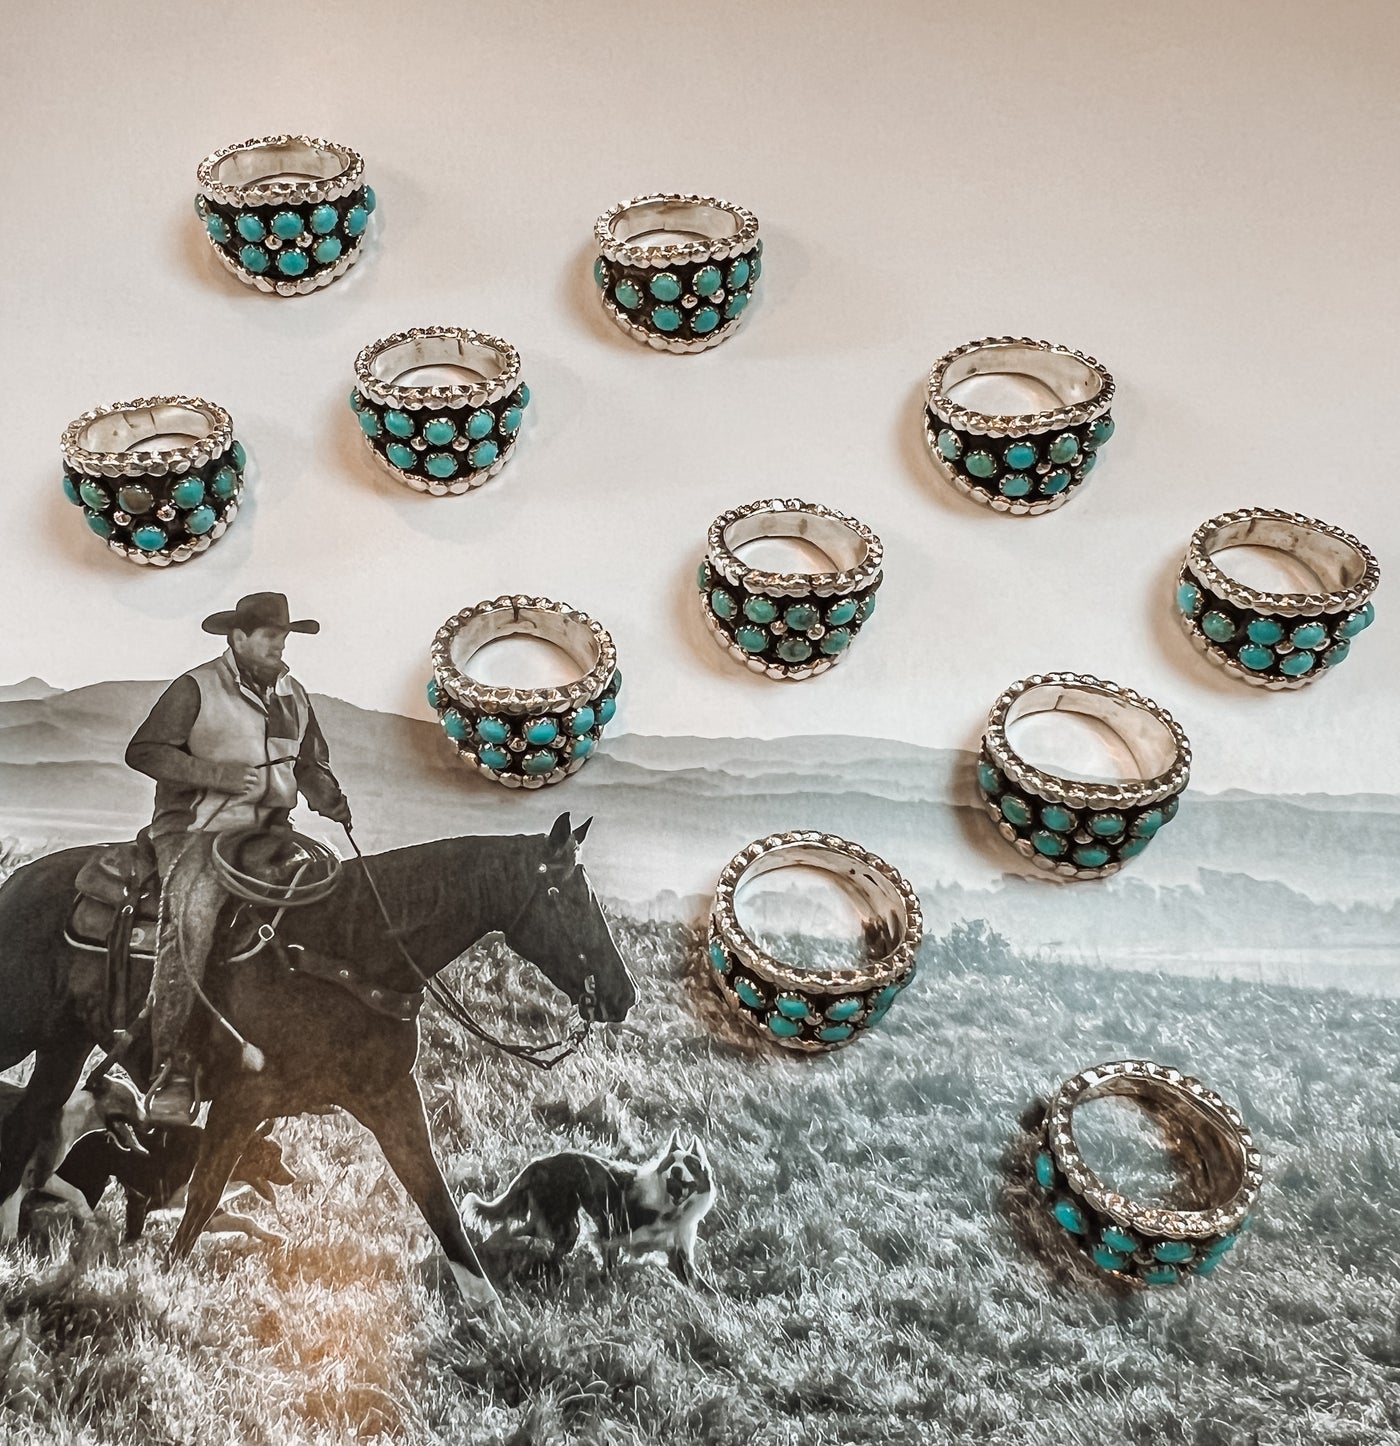 The Salinas Turquoise Ring